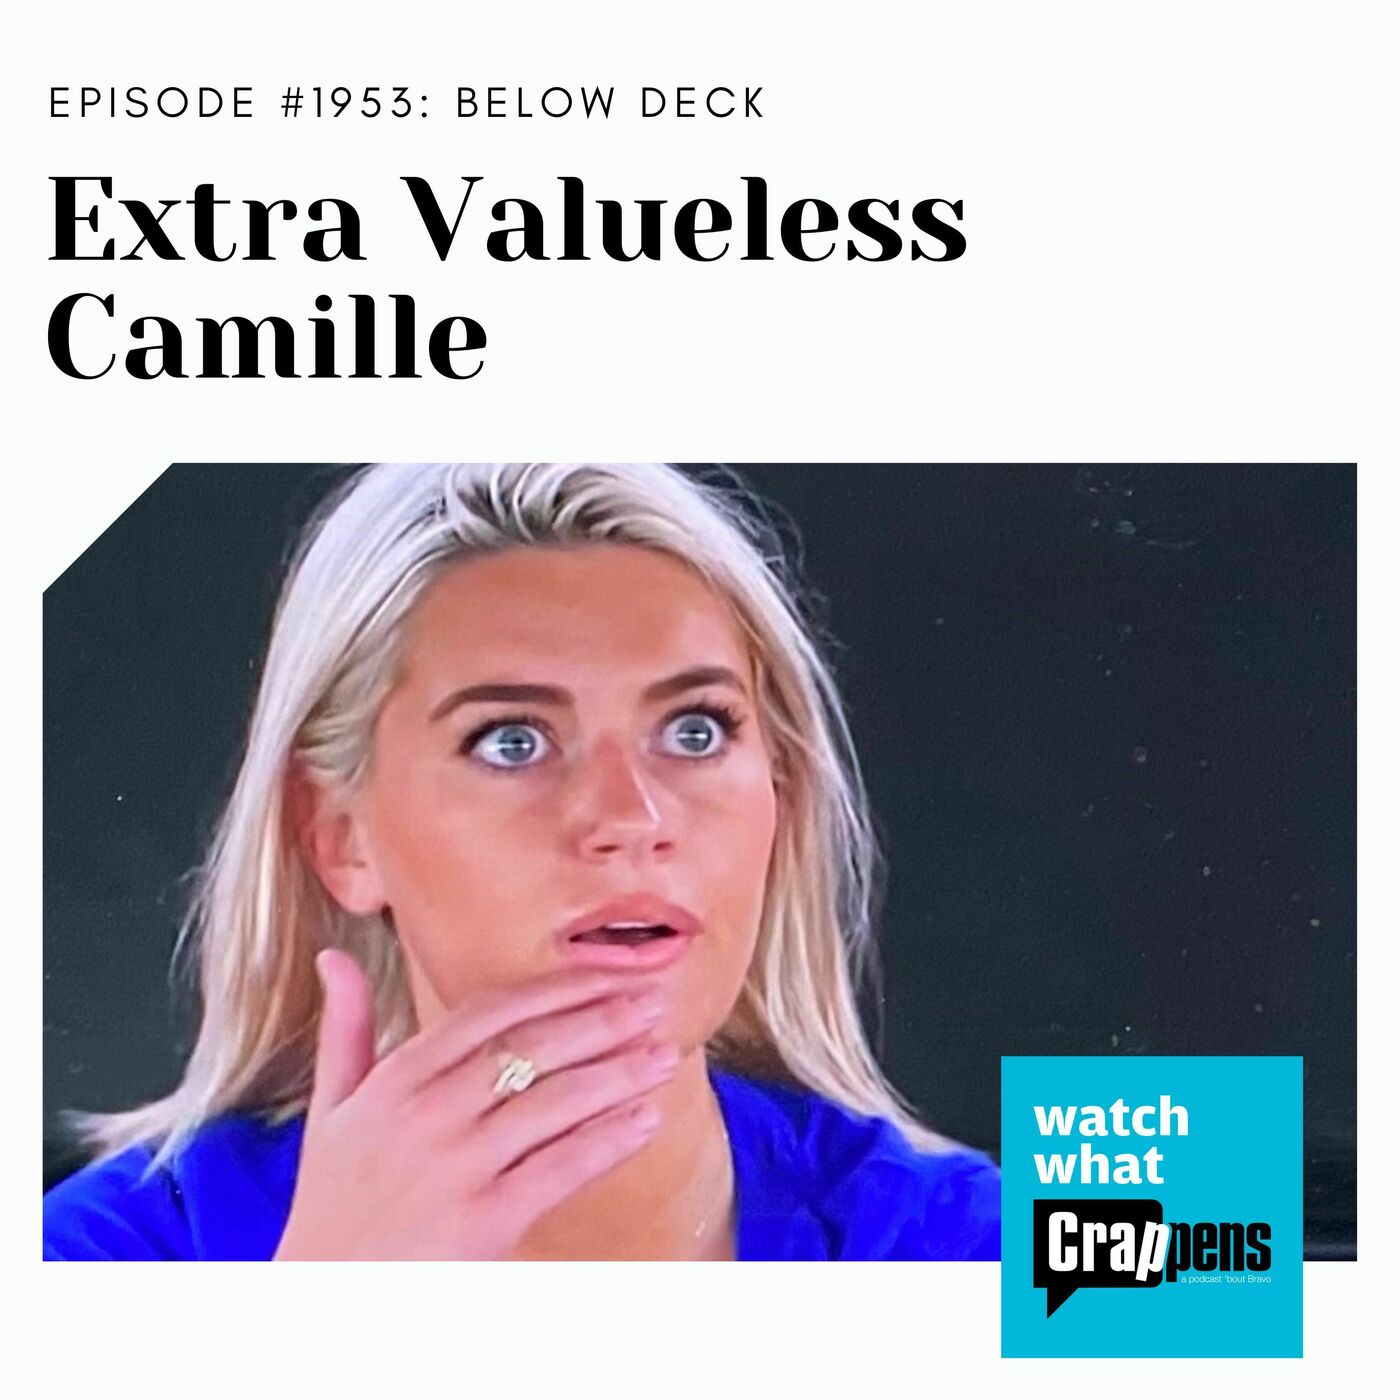 Below Deck: Extra Valueless Camille